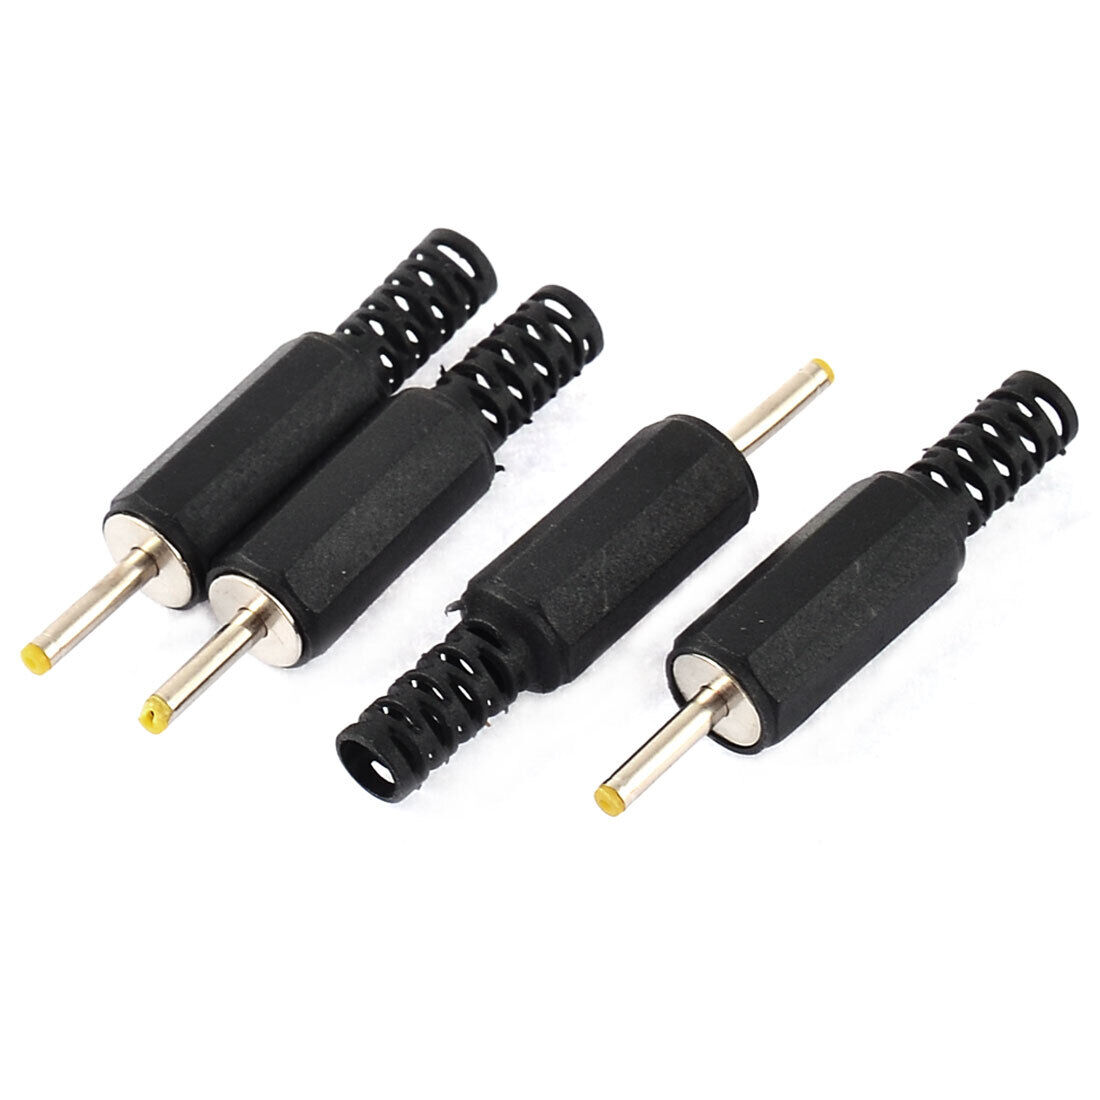 4pcs 2.5mm x 0.7mm Solder Type DC Power Cable Socket Male Connector Adapter